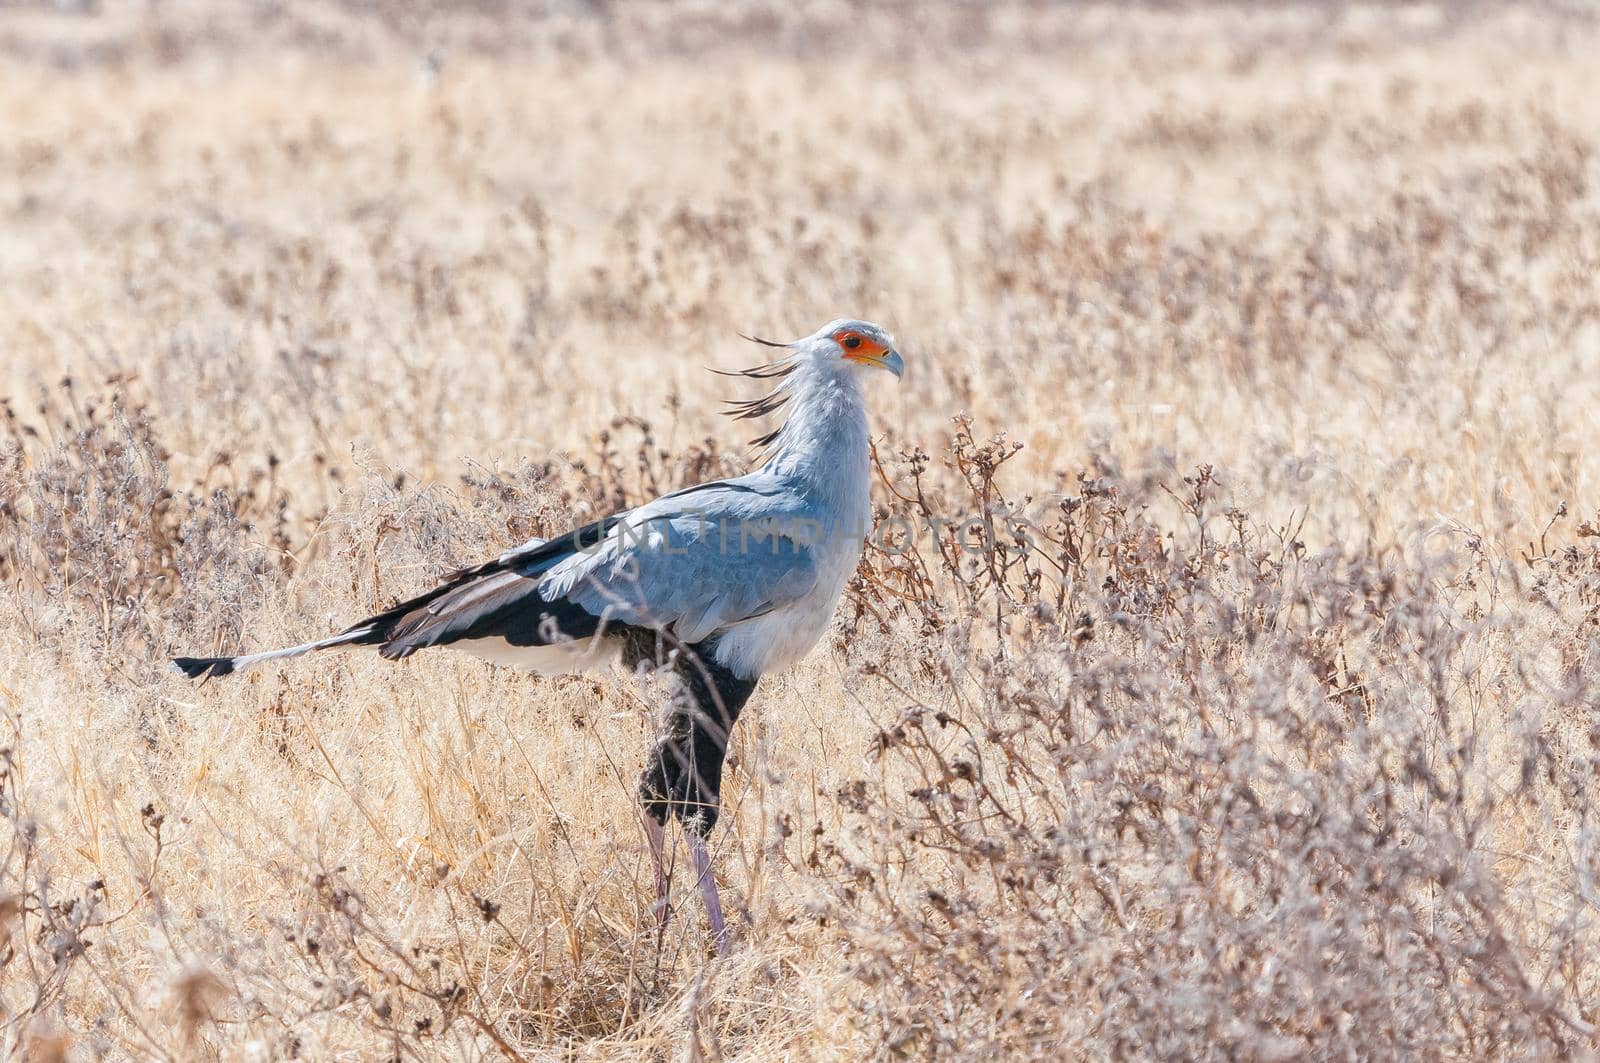 A Secretary Bird, Sagittarius serpentarius, on the ground and looking to the right in northern Namibia